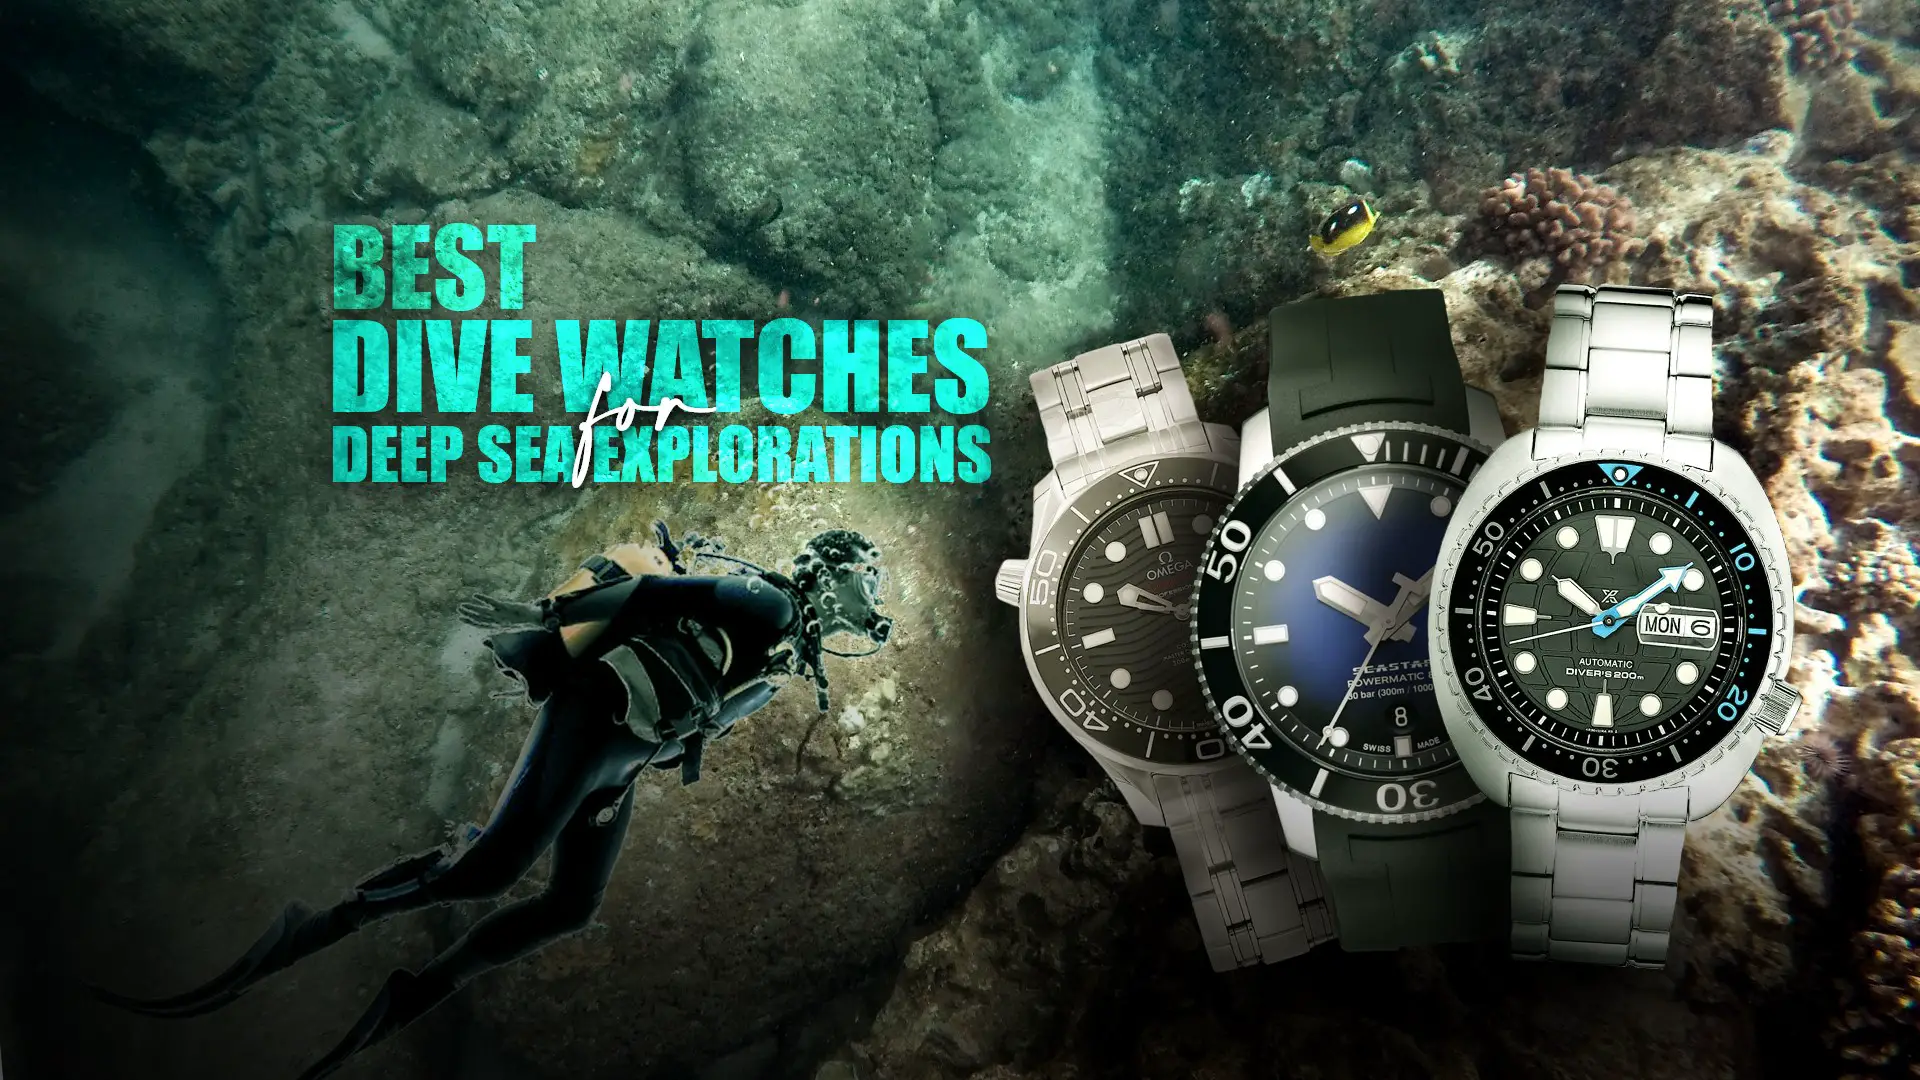 7 Best Dive Watches for Deep Sea Explorations